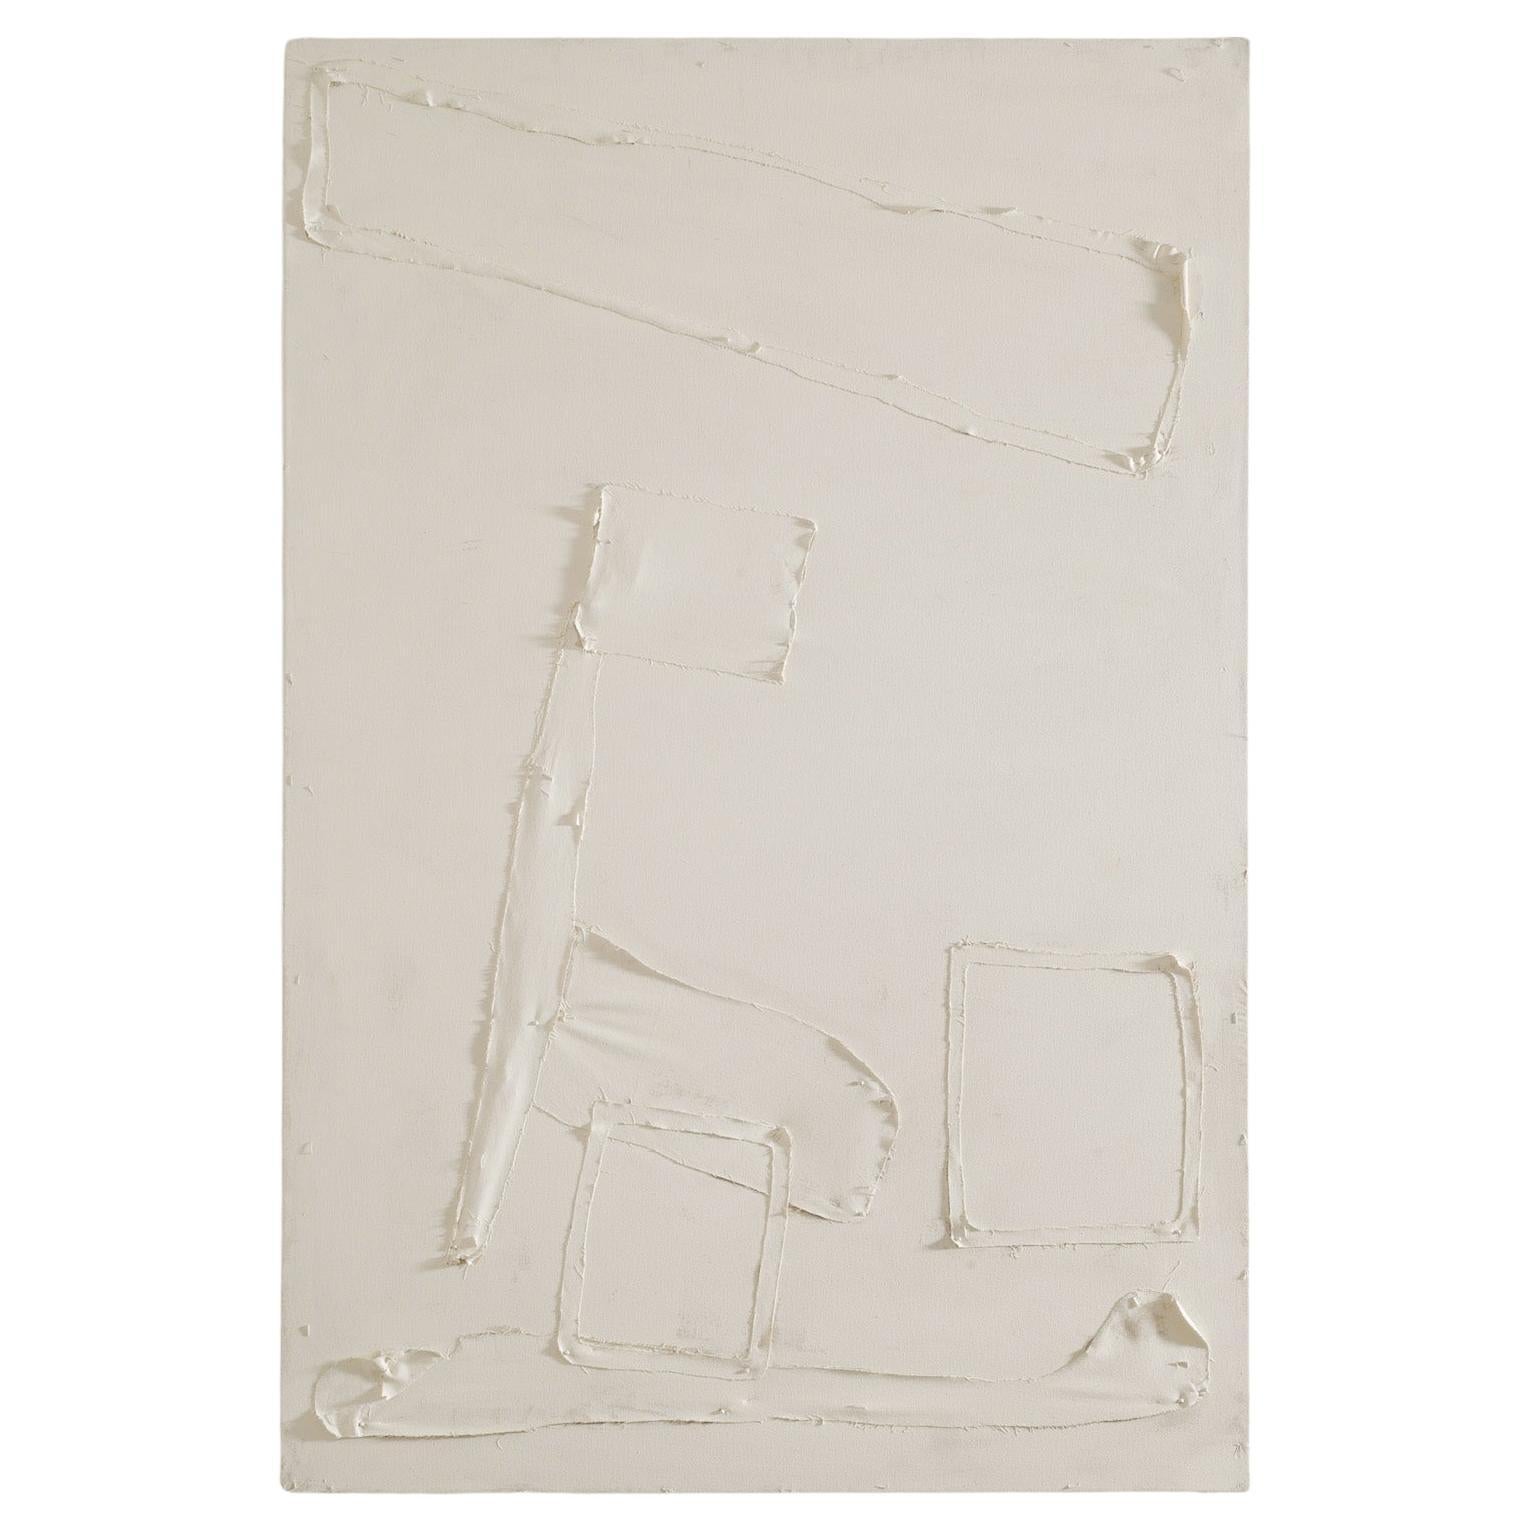 Wolfgang Voegele "Untitled" Abstract White Artwork on Canvas 60x40", 2019